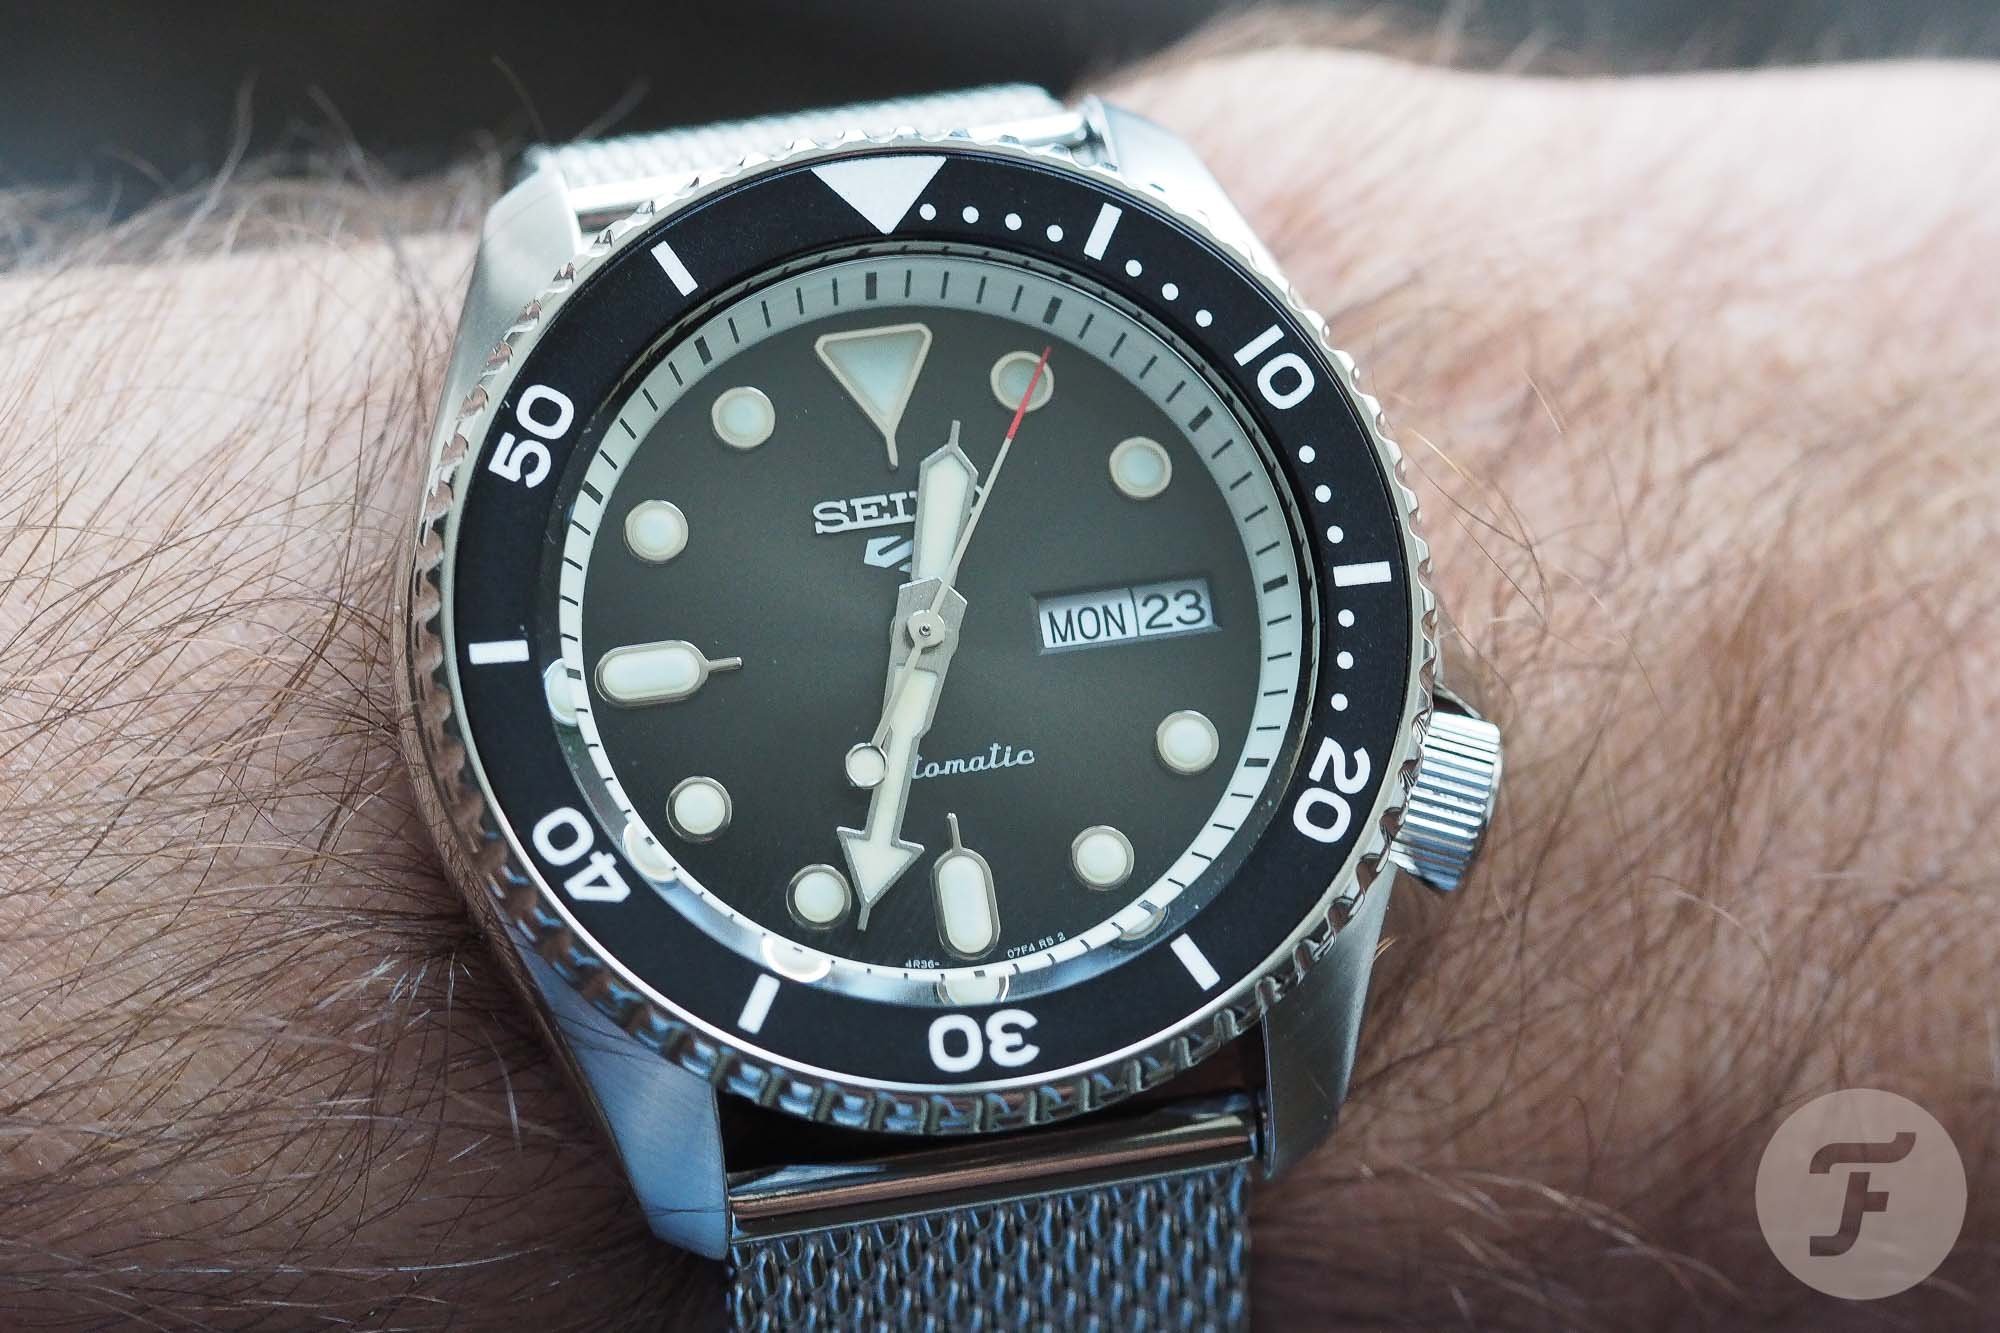 Boxing Day: A Longer Look at the Seiko 5 Sports